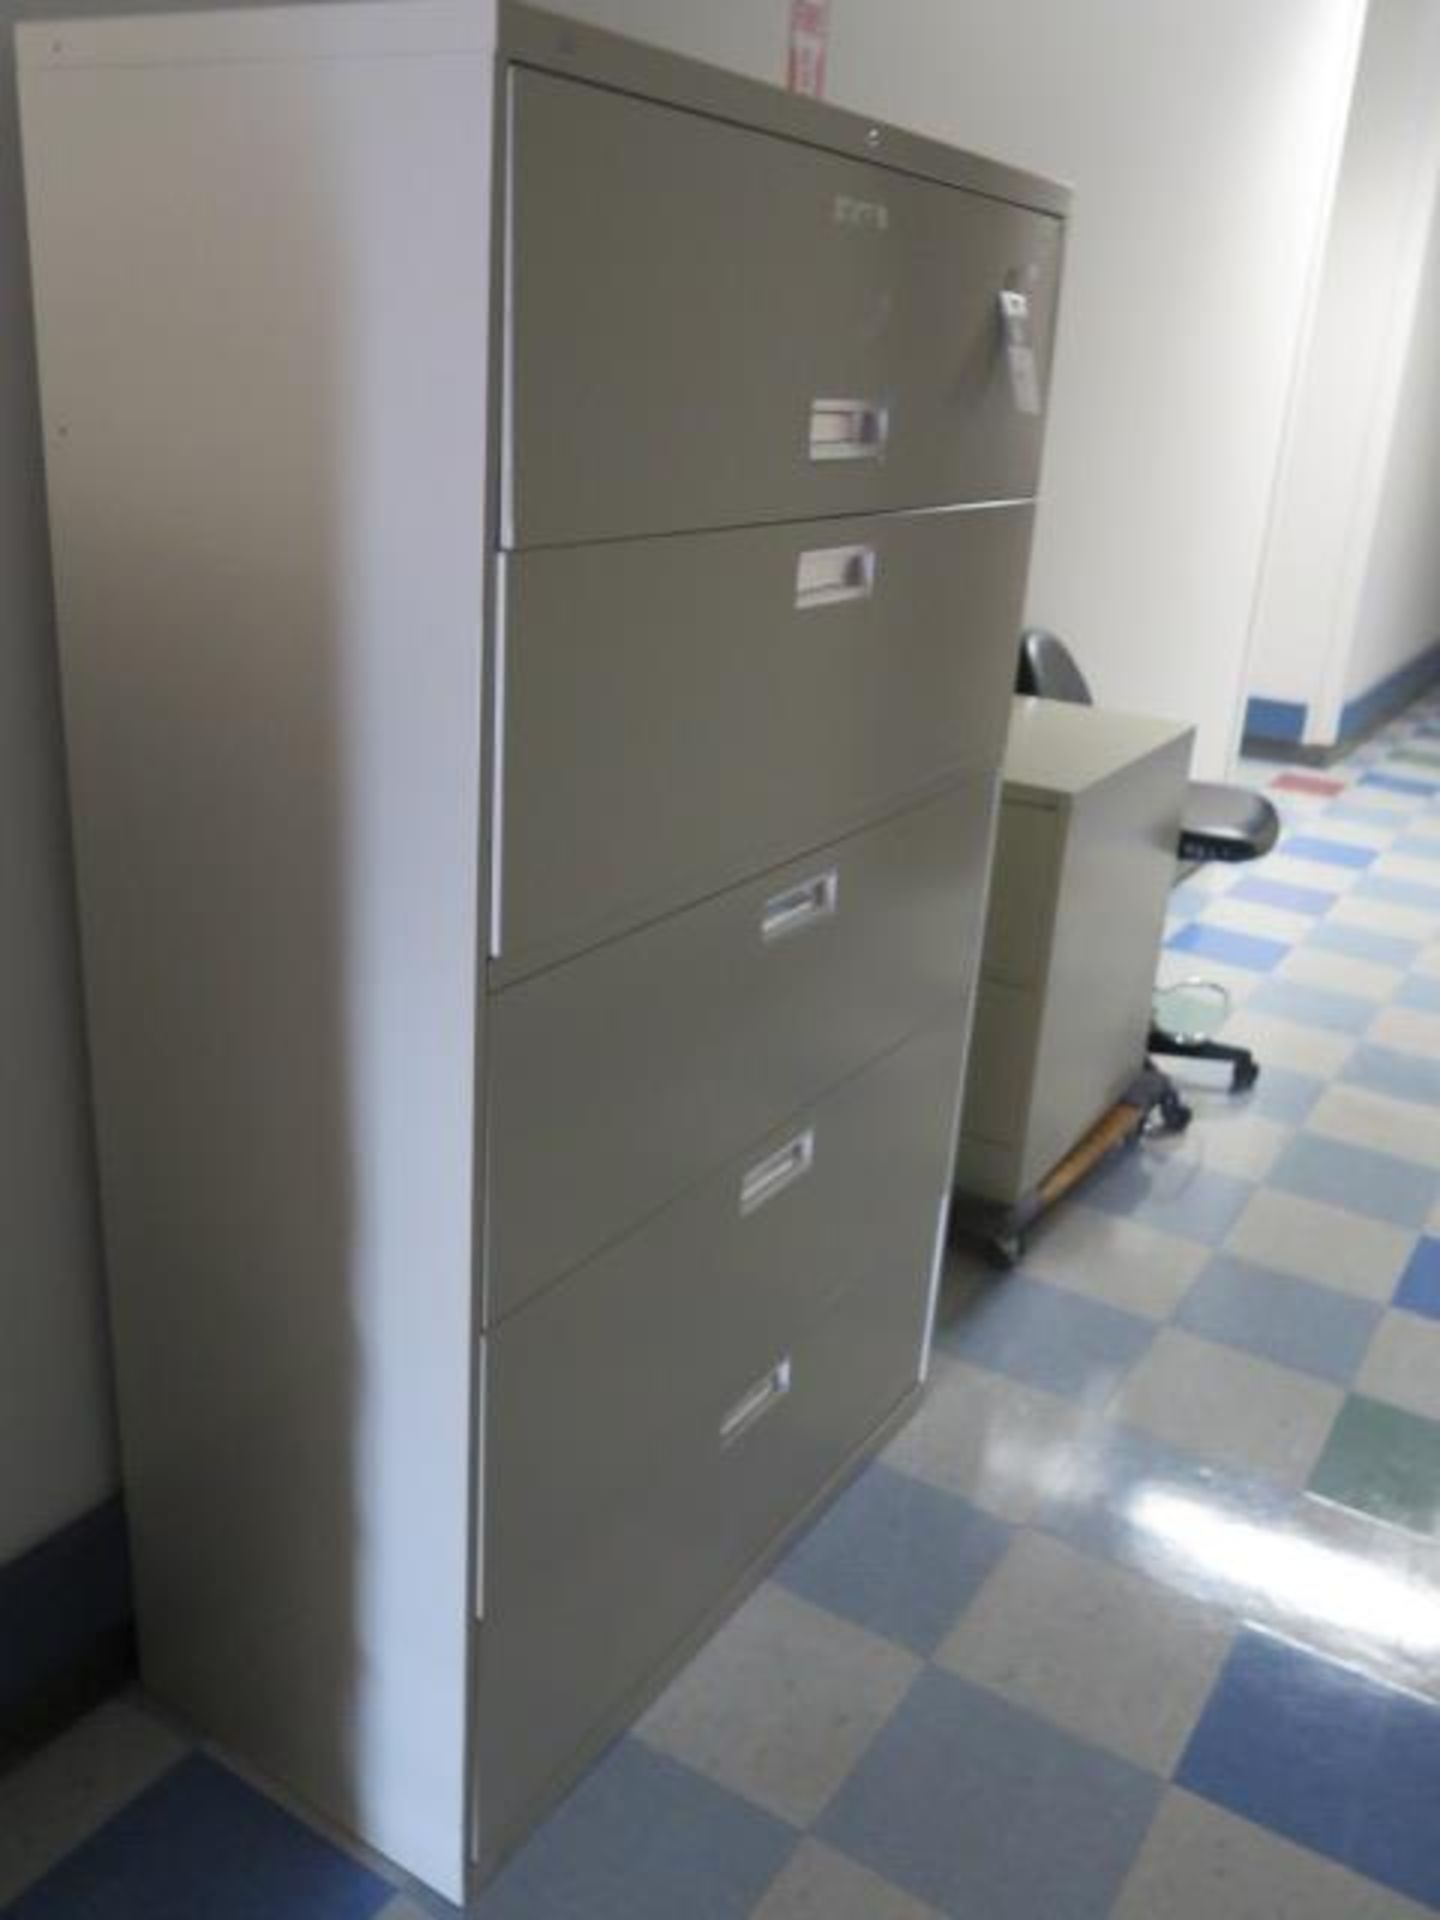 Lateral File Cabinets (2) (SOLD AS-IS - NO WARRANTY) - Image 3 of 4